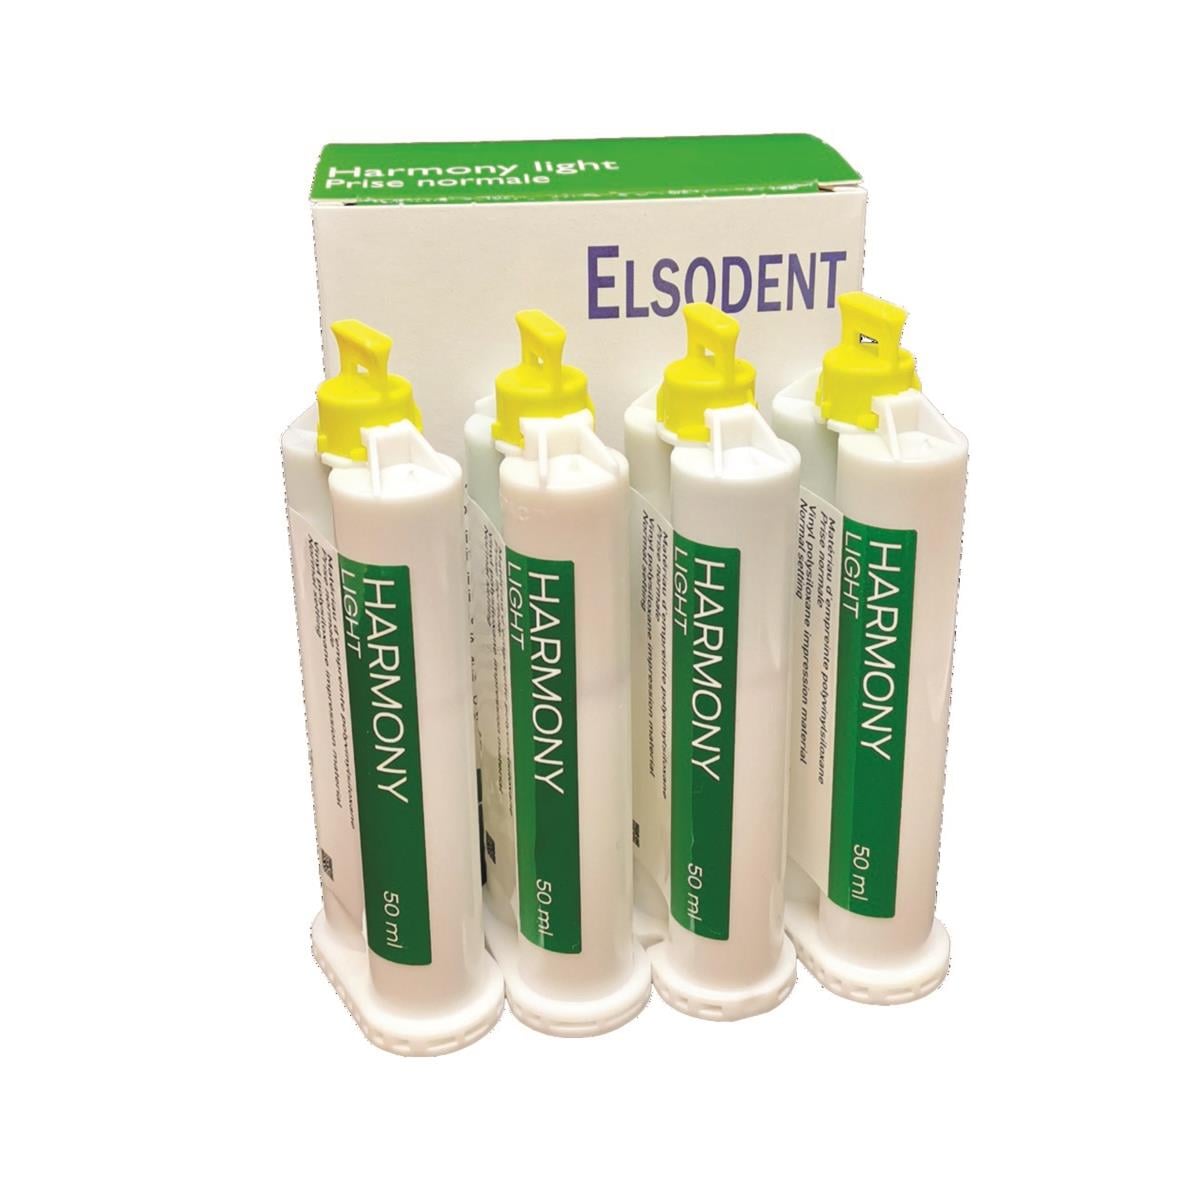 Harmony - Light - prise normale - 4x50mL - ELSODENT